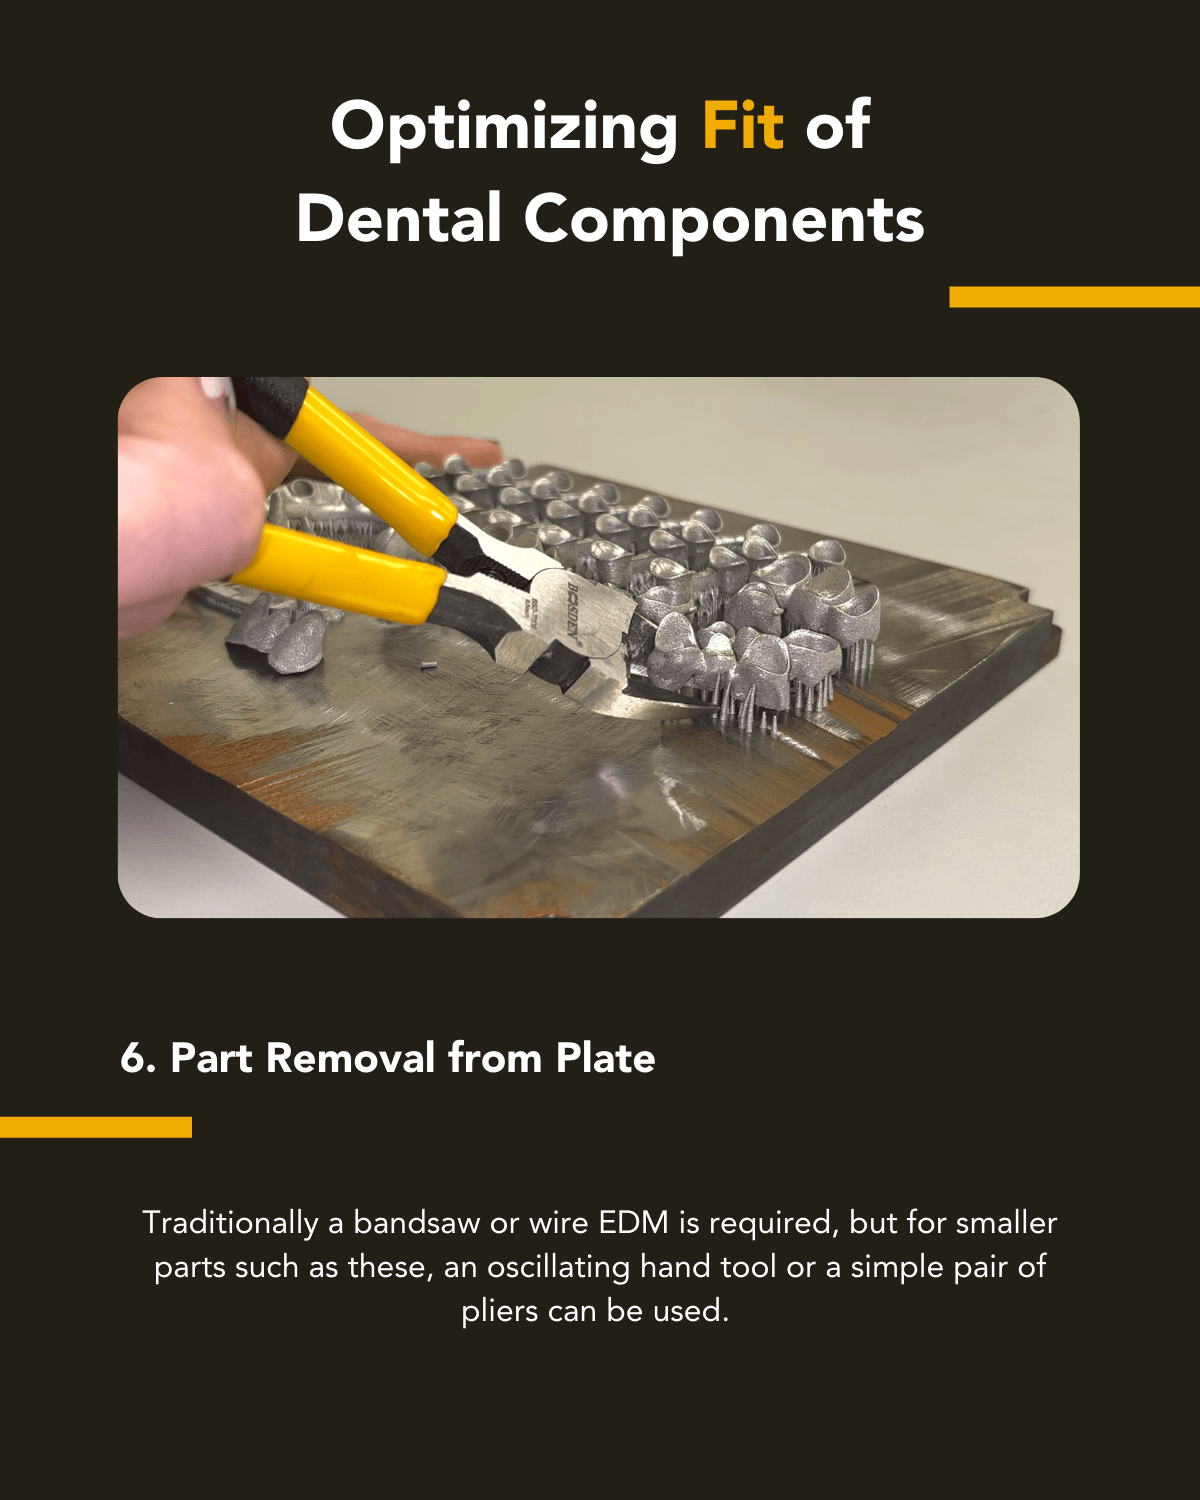 Step Five in Optimizing the fit of dental components for metal 3d printing: Traditionally a bandsaw or wire EDM is required, but for the smaller parts such as these, an oscillating hand tool or a simple paid of pliers can be used.